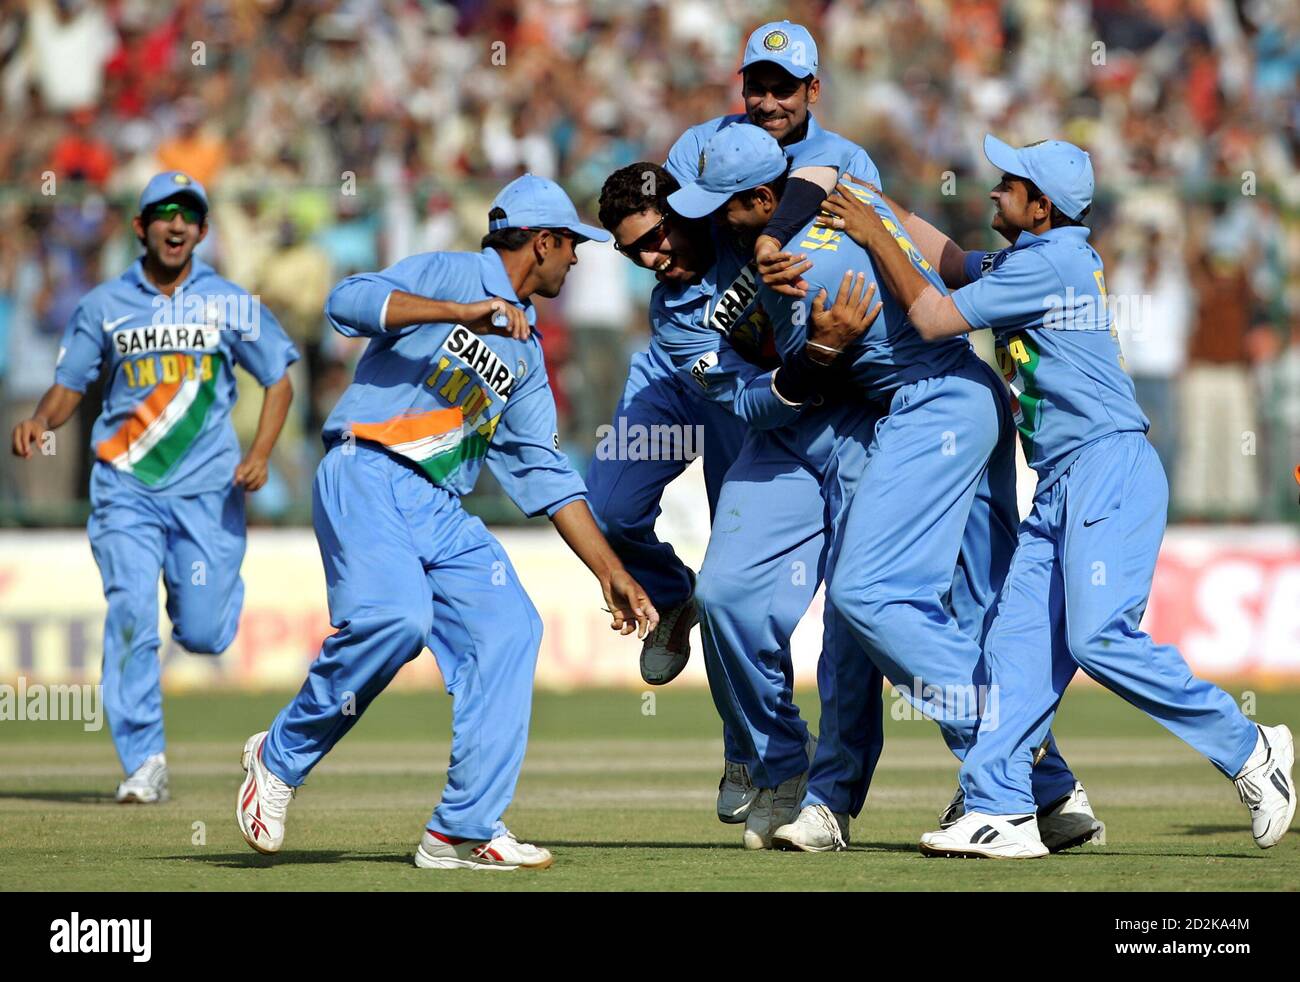 India's cricket team players celebrate the dismissal of England's Kabir Ali  during their first one-day international cricket match in New Delhi March  28, 2006. Off-spinner Harbhajan Singh captured a career-best five for